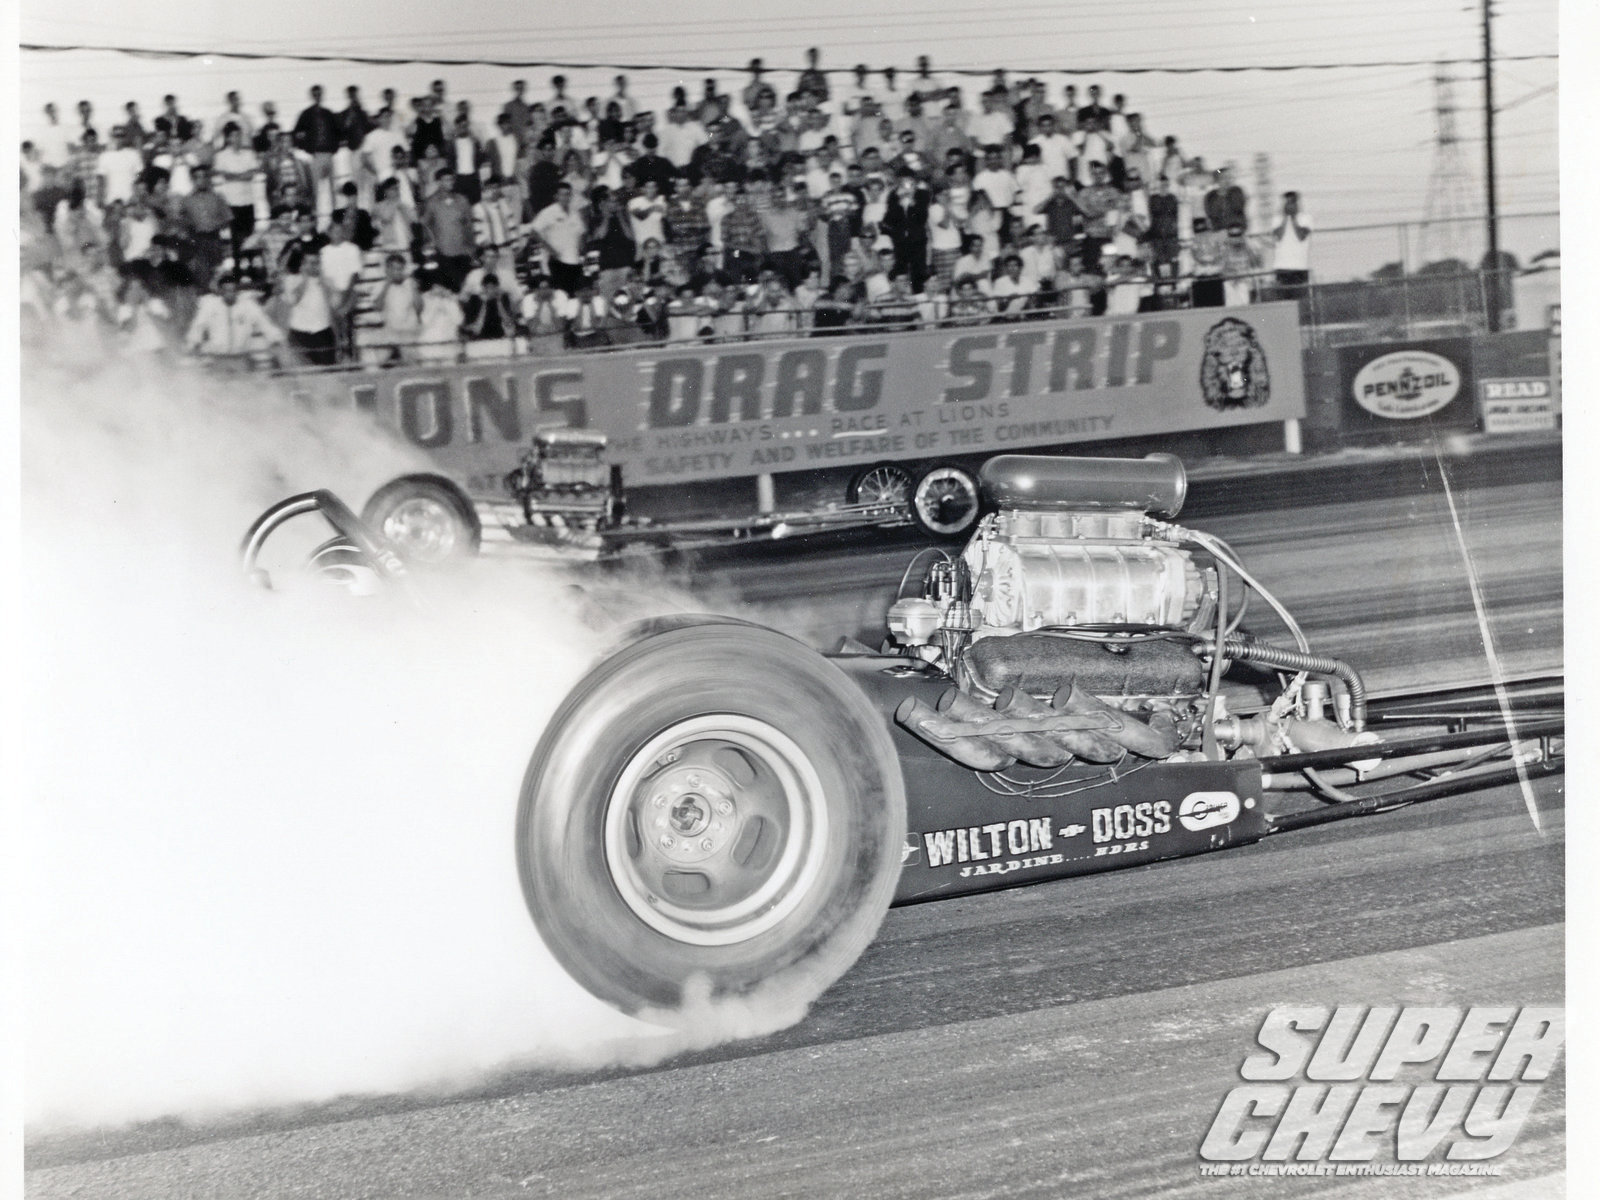 sucp-1203-10+super-chevy-drag-racing-greats+wilton-and-doss-chevy-dragster.jpg